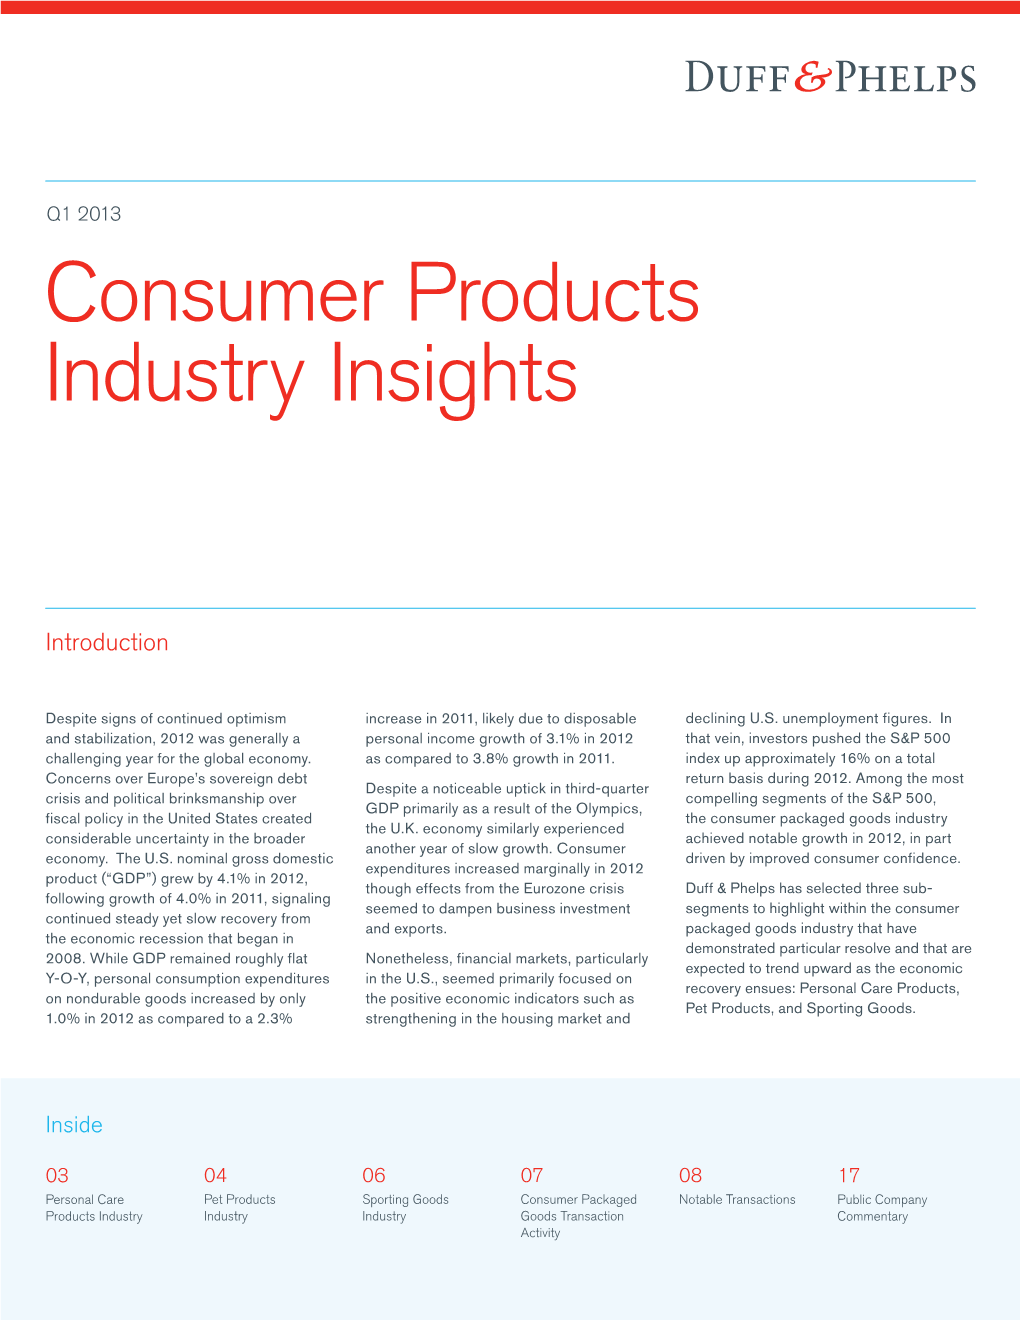 Consumer Products Industry Insights